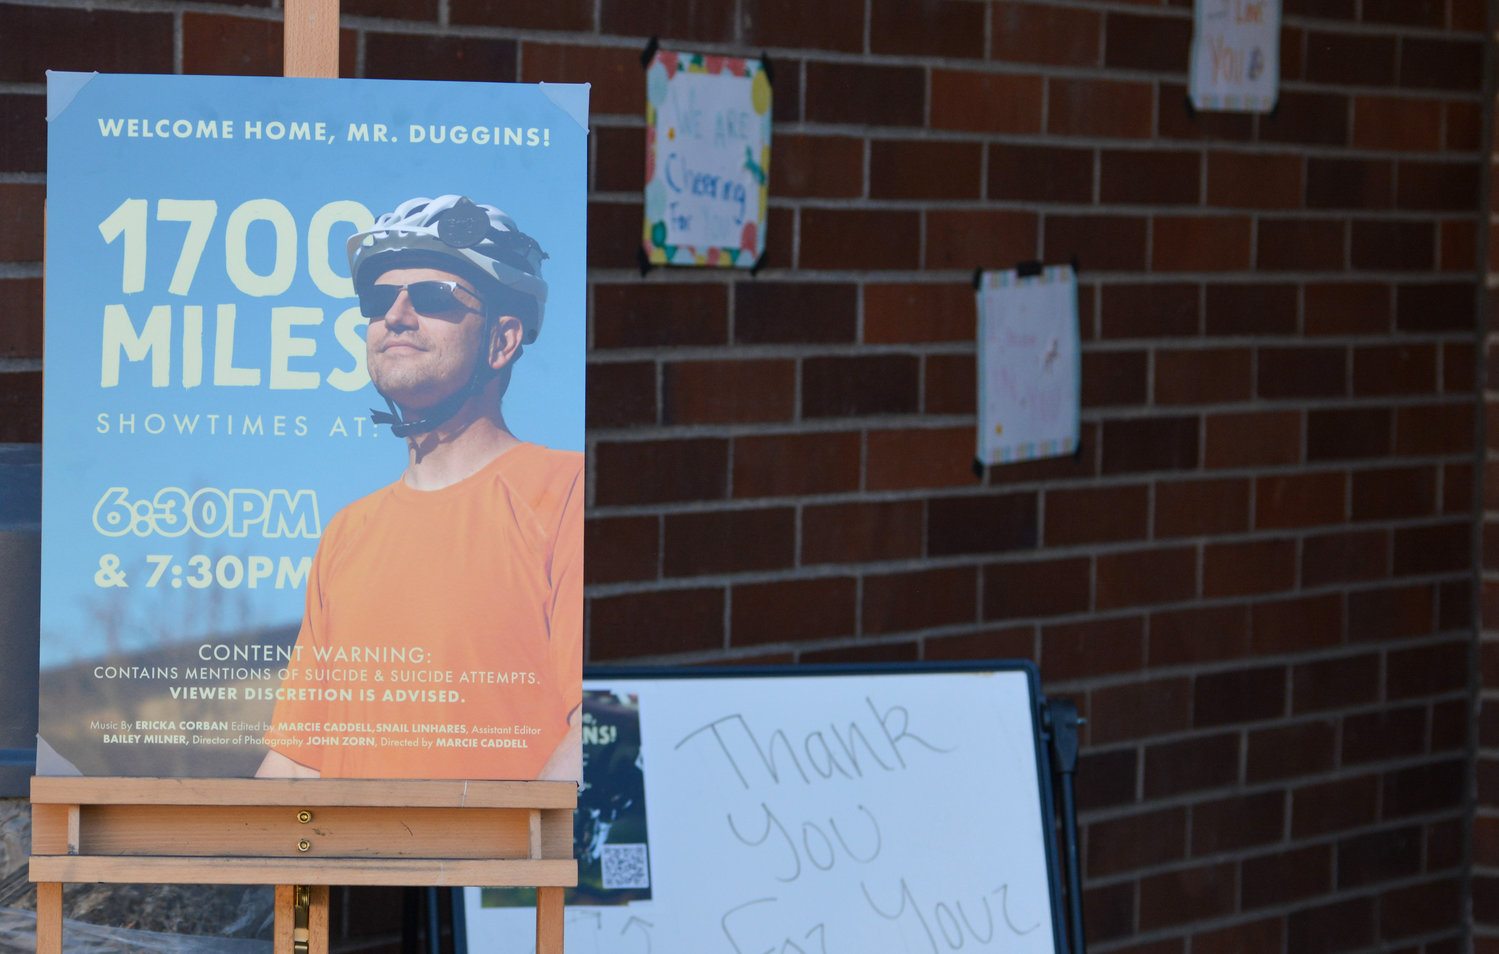 The 19-minute documentary titled “1,700 Miles,” tells the story of how Hockinson teacher Jeremy Duggins began on his journey to spread awareness about mental health and suicide prevention.